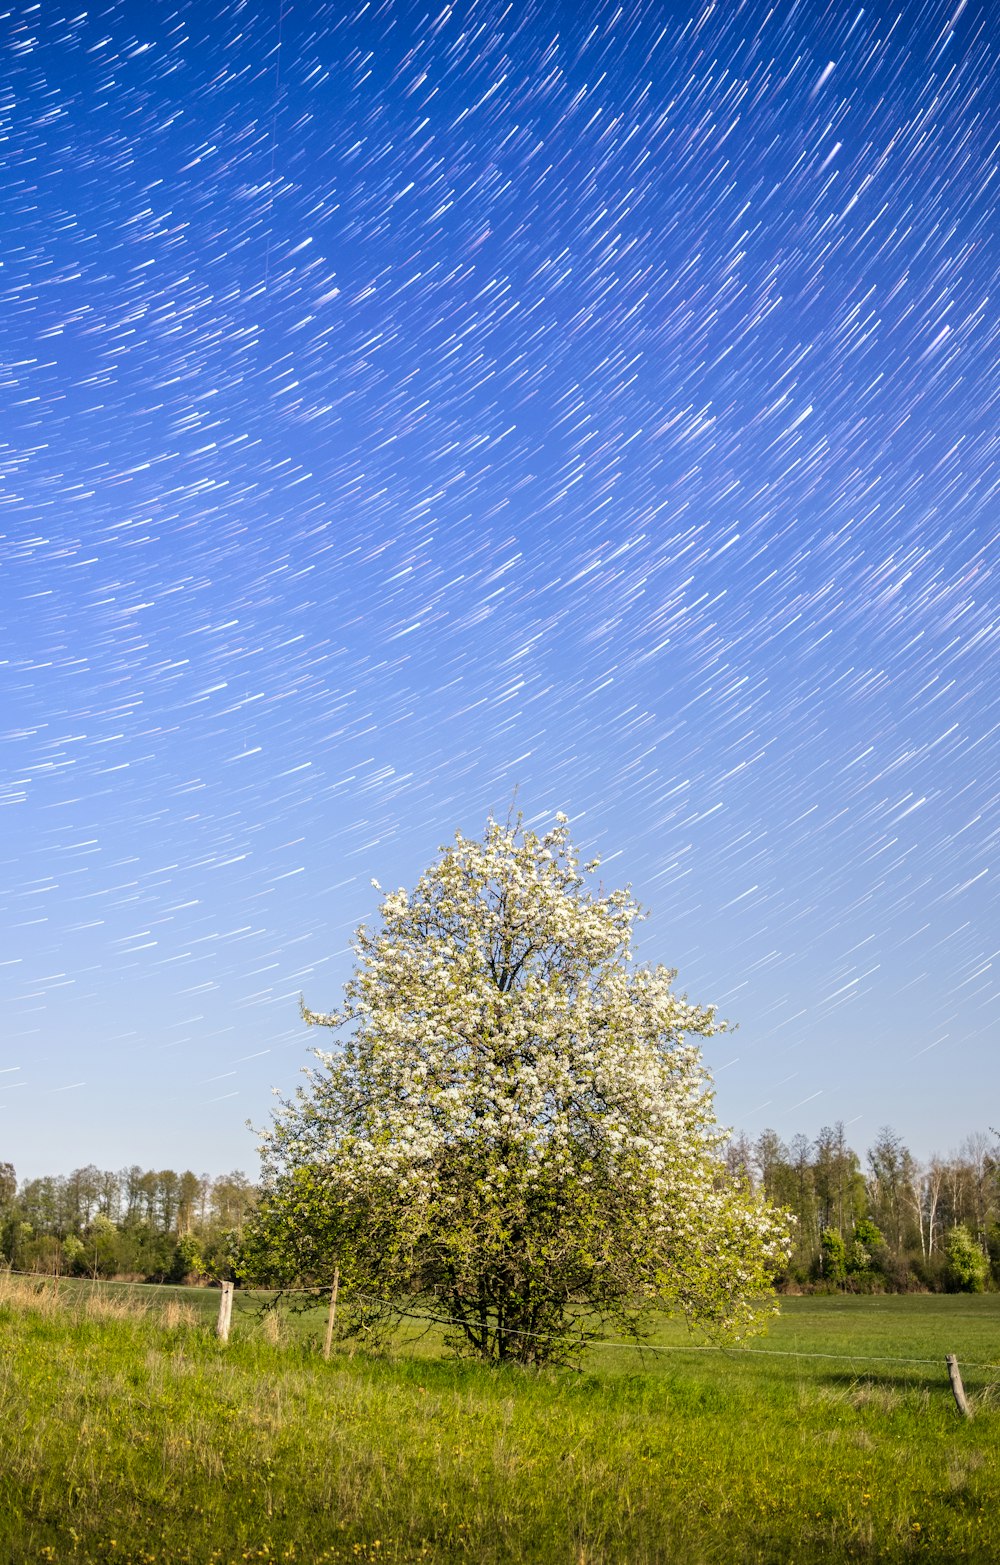 a tree in a grassy field under a star filled sky